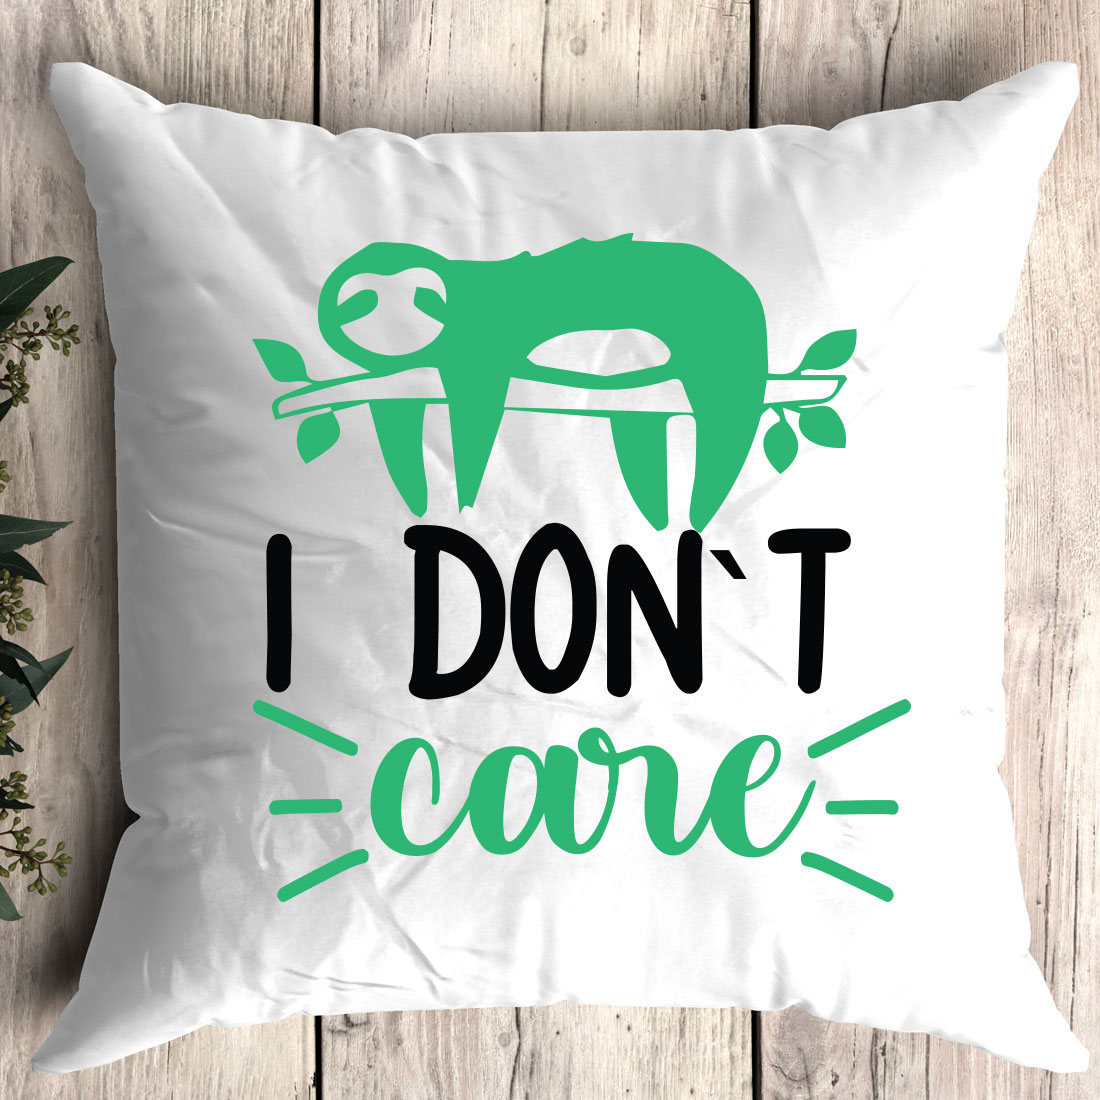 Pillow that says i don't care on it.